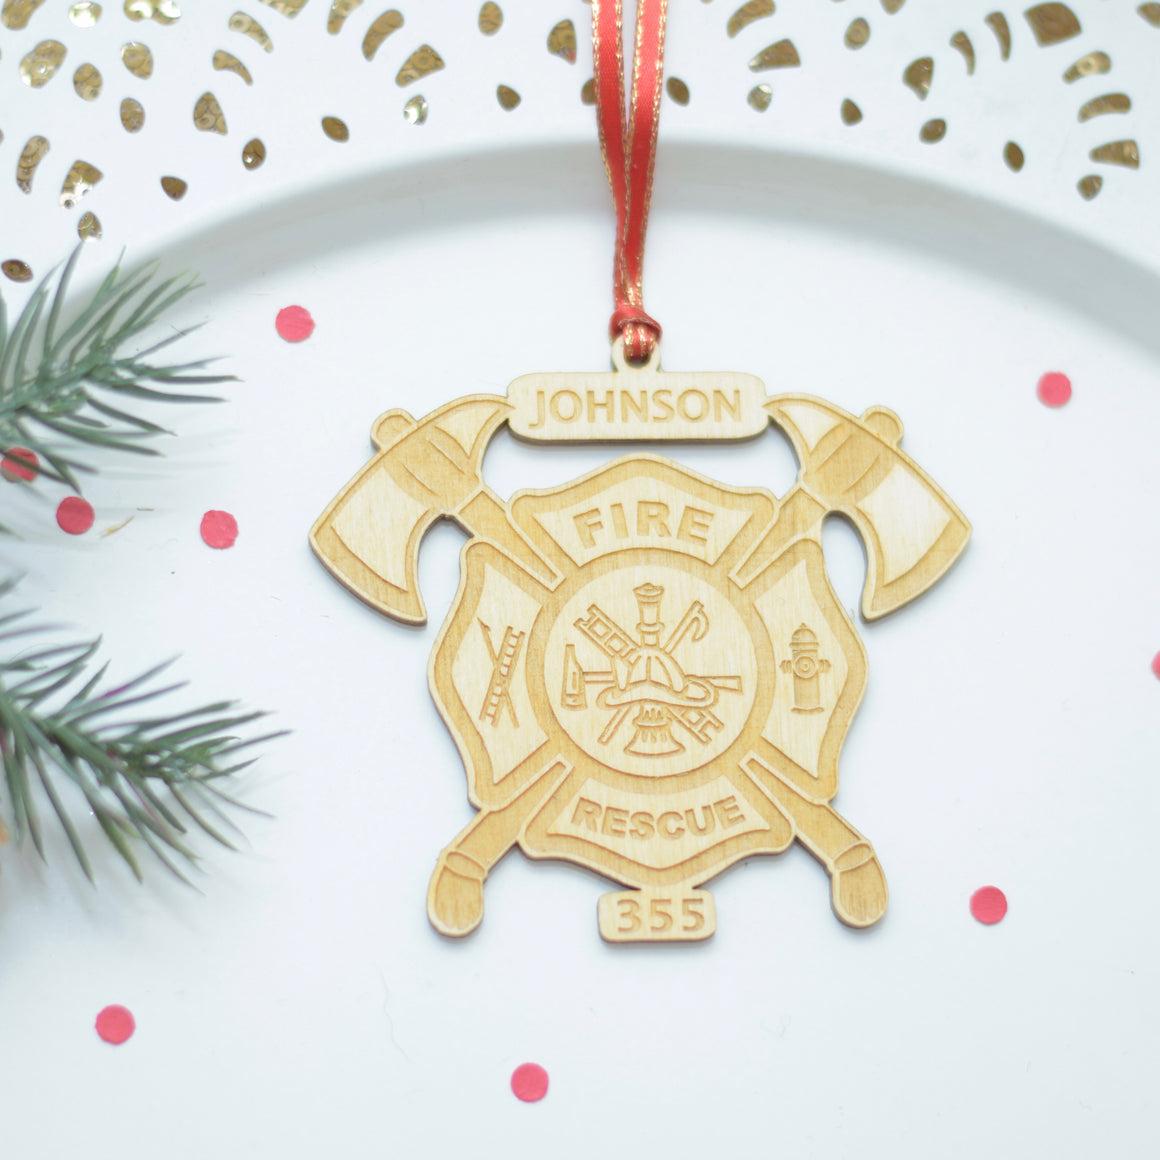 fire fighter ornament on a cake plate